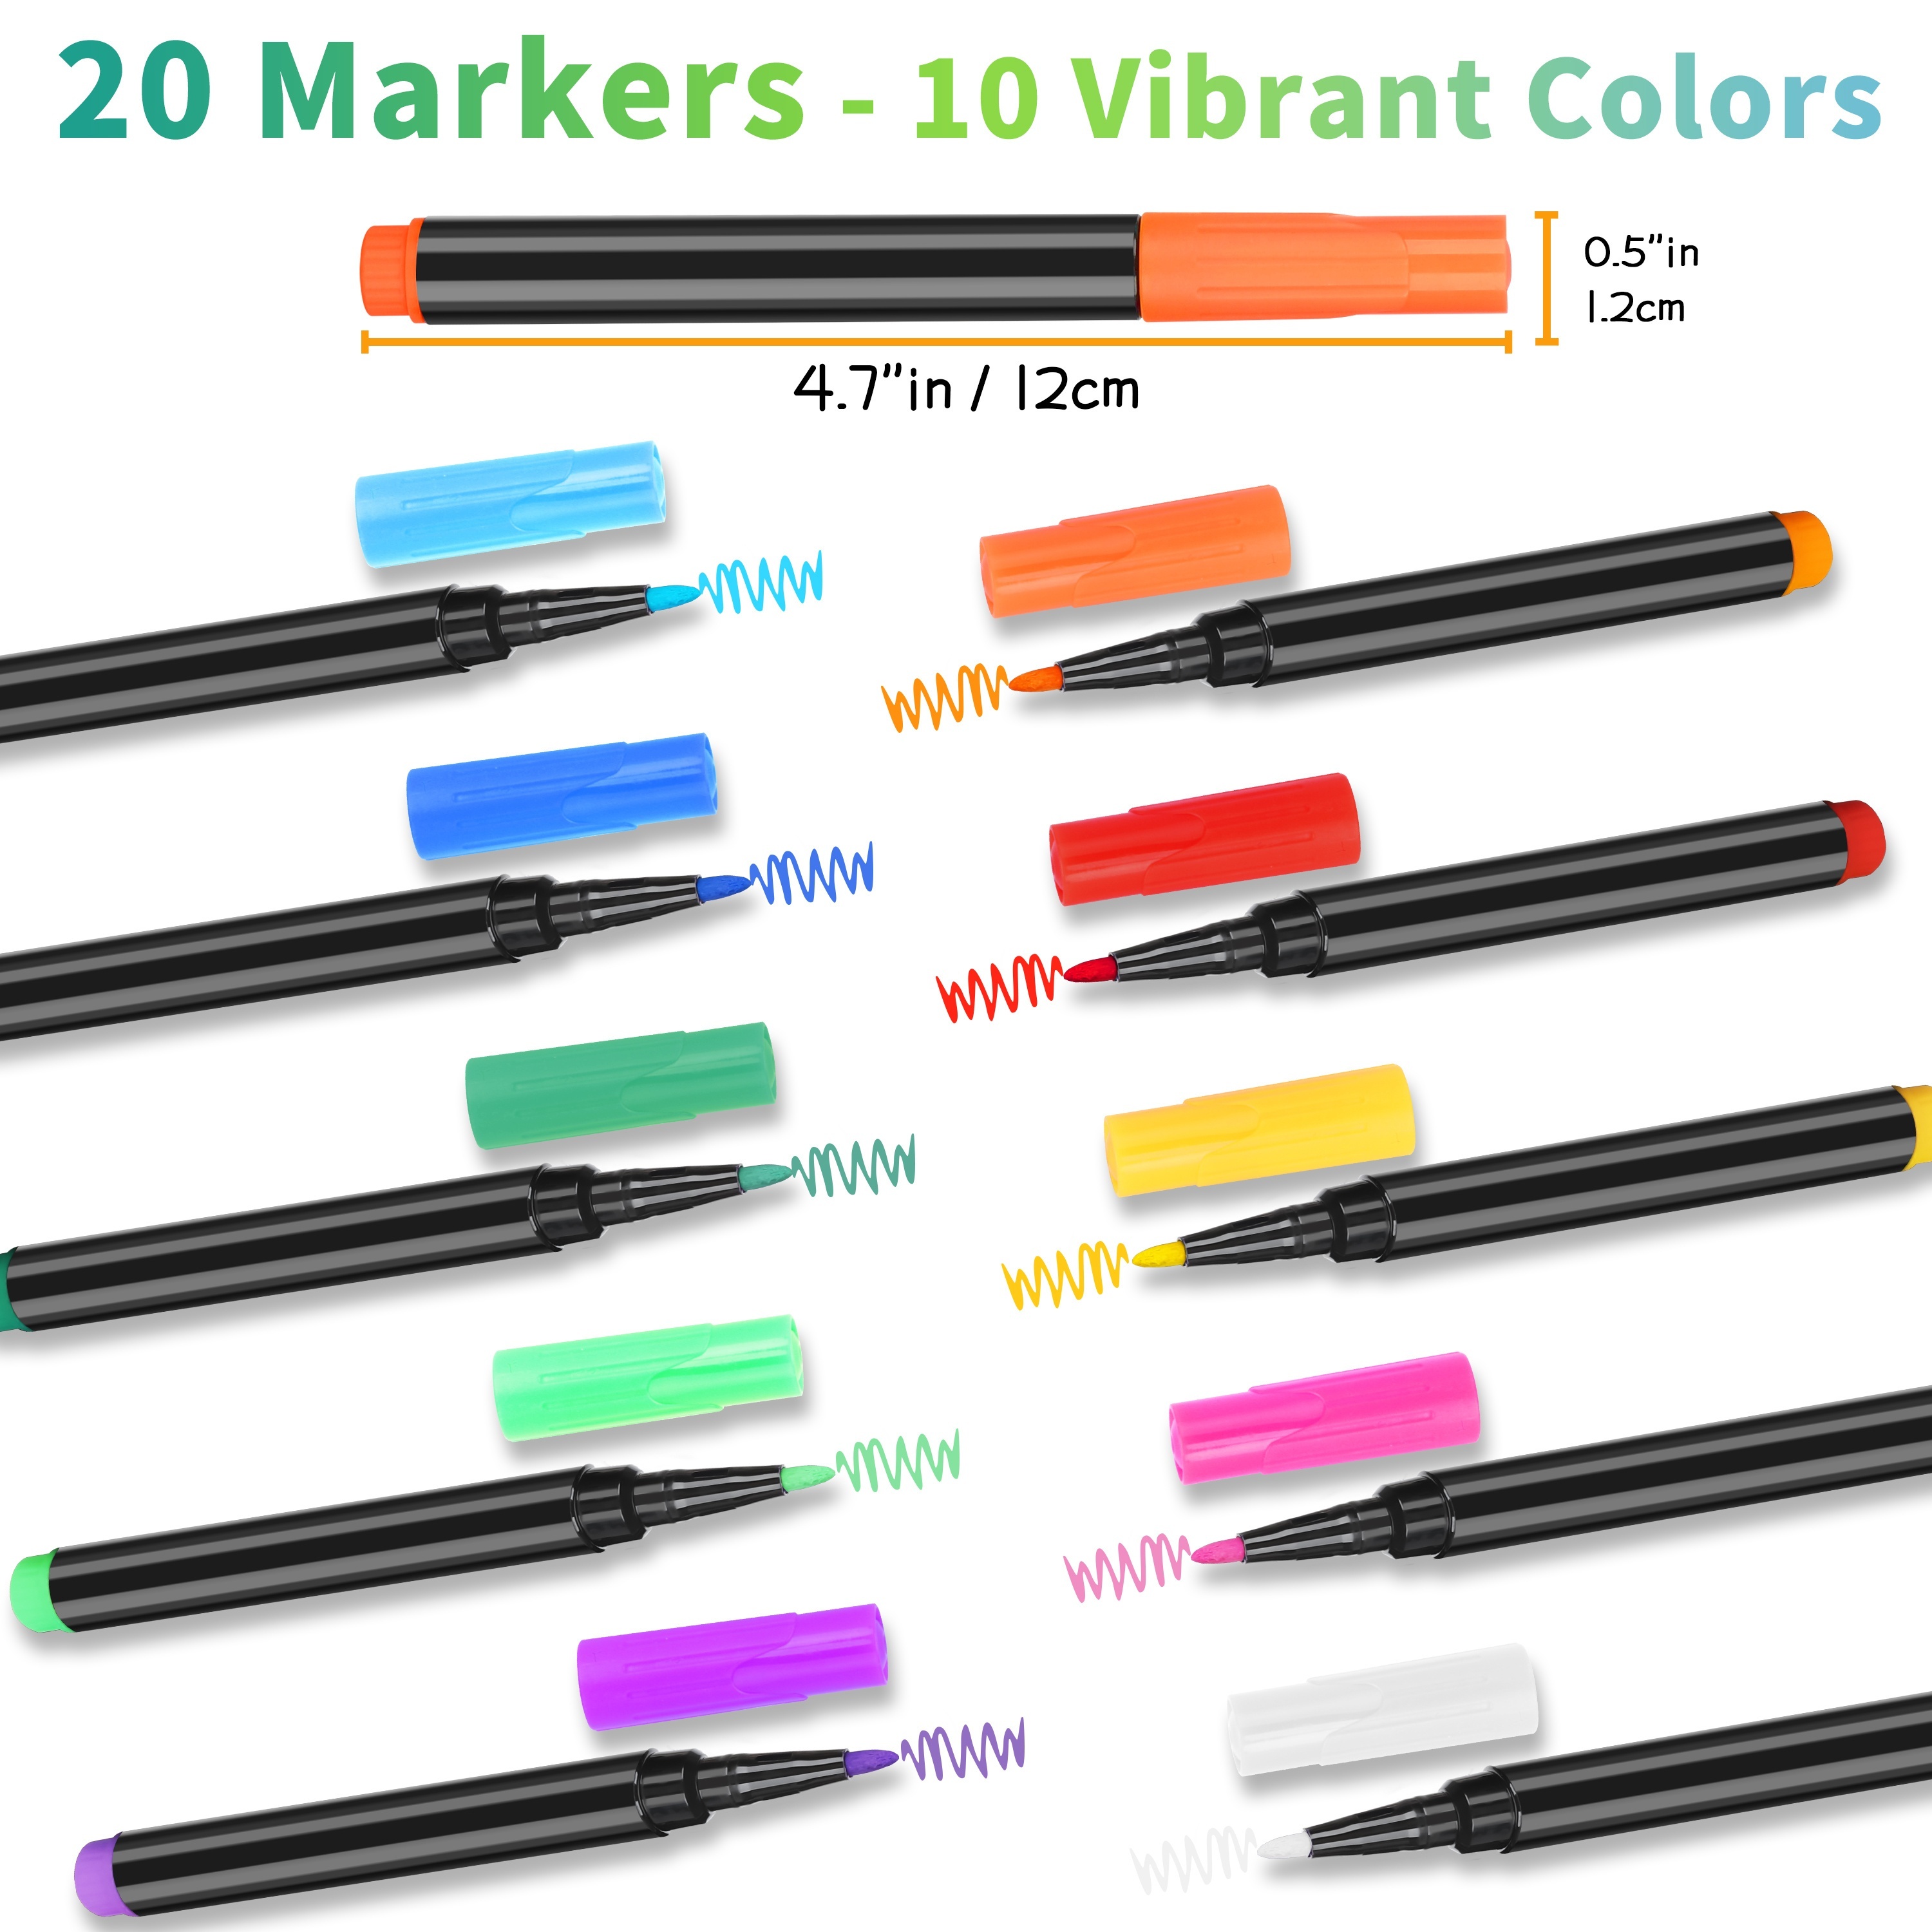  Liquid Chalk Marker 1mm Fine Tip Wet Erase Marker, 6 Vibrant  Colors/18 Packs for Acrylic Fridge Calendar, Clear Glass Wall/Window/Mirror  Writing Planning Board, Quick-drying, Non-porous Surface : Office Products